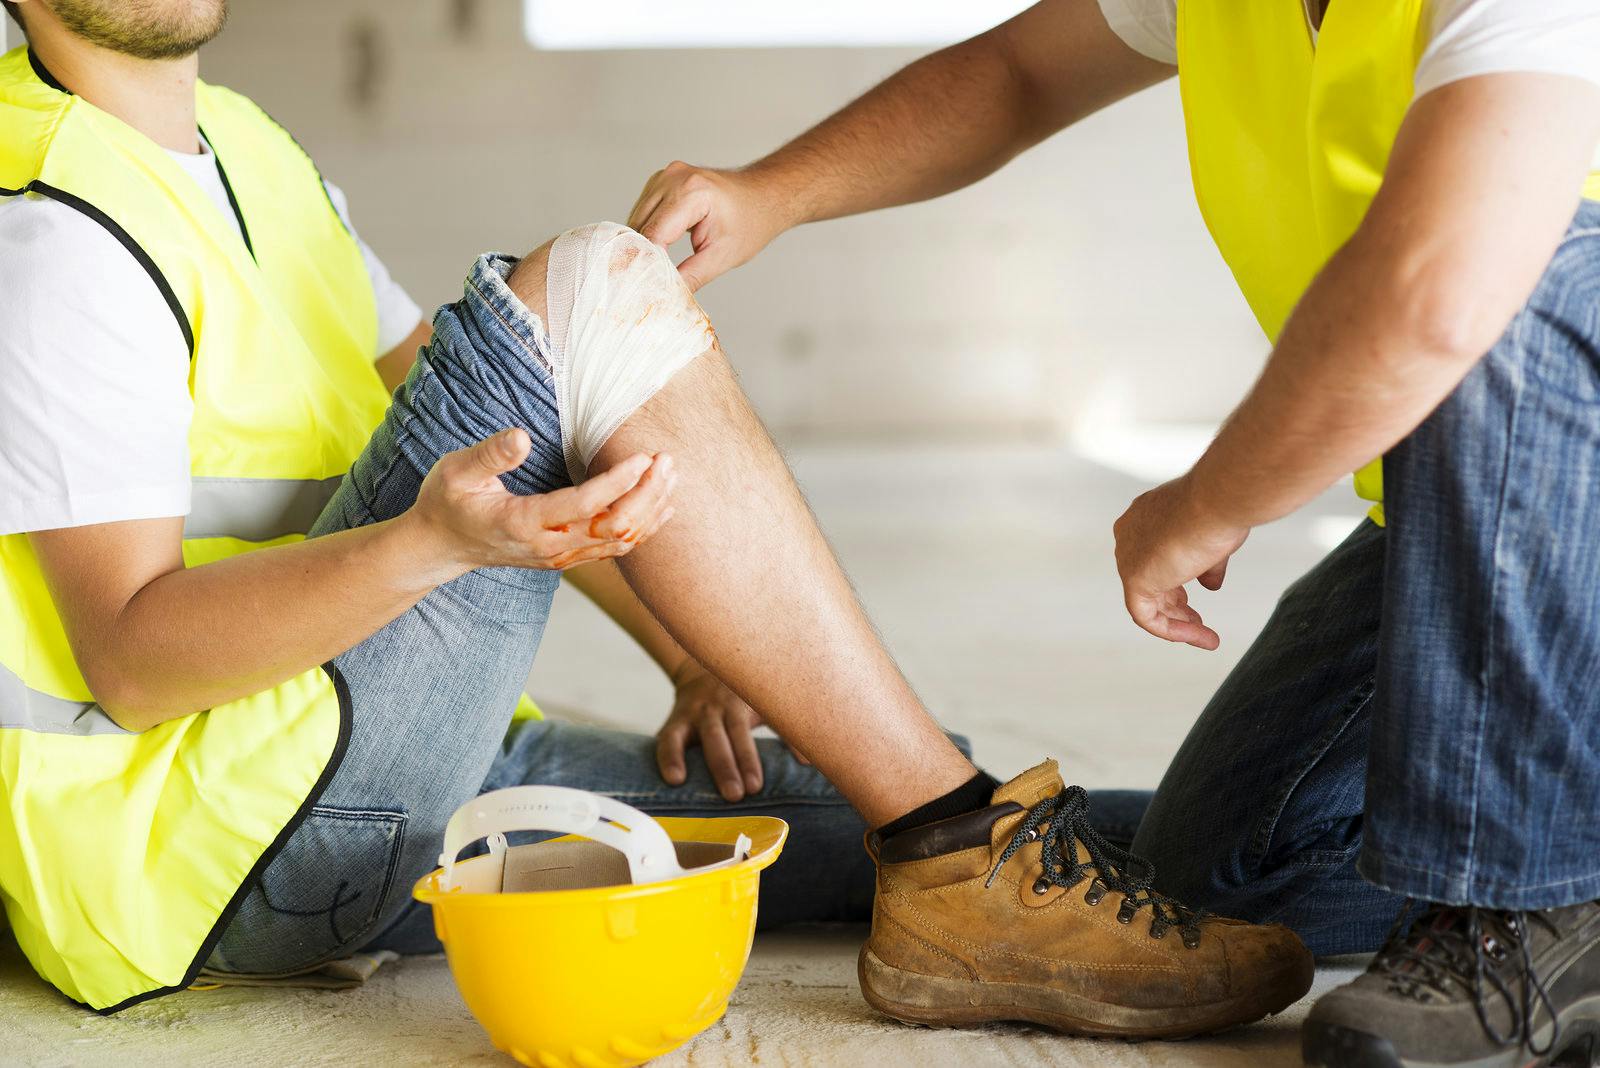 Construction Worker With A Injured Knee